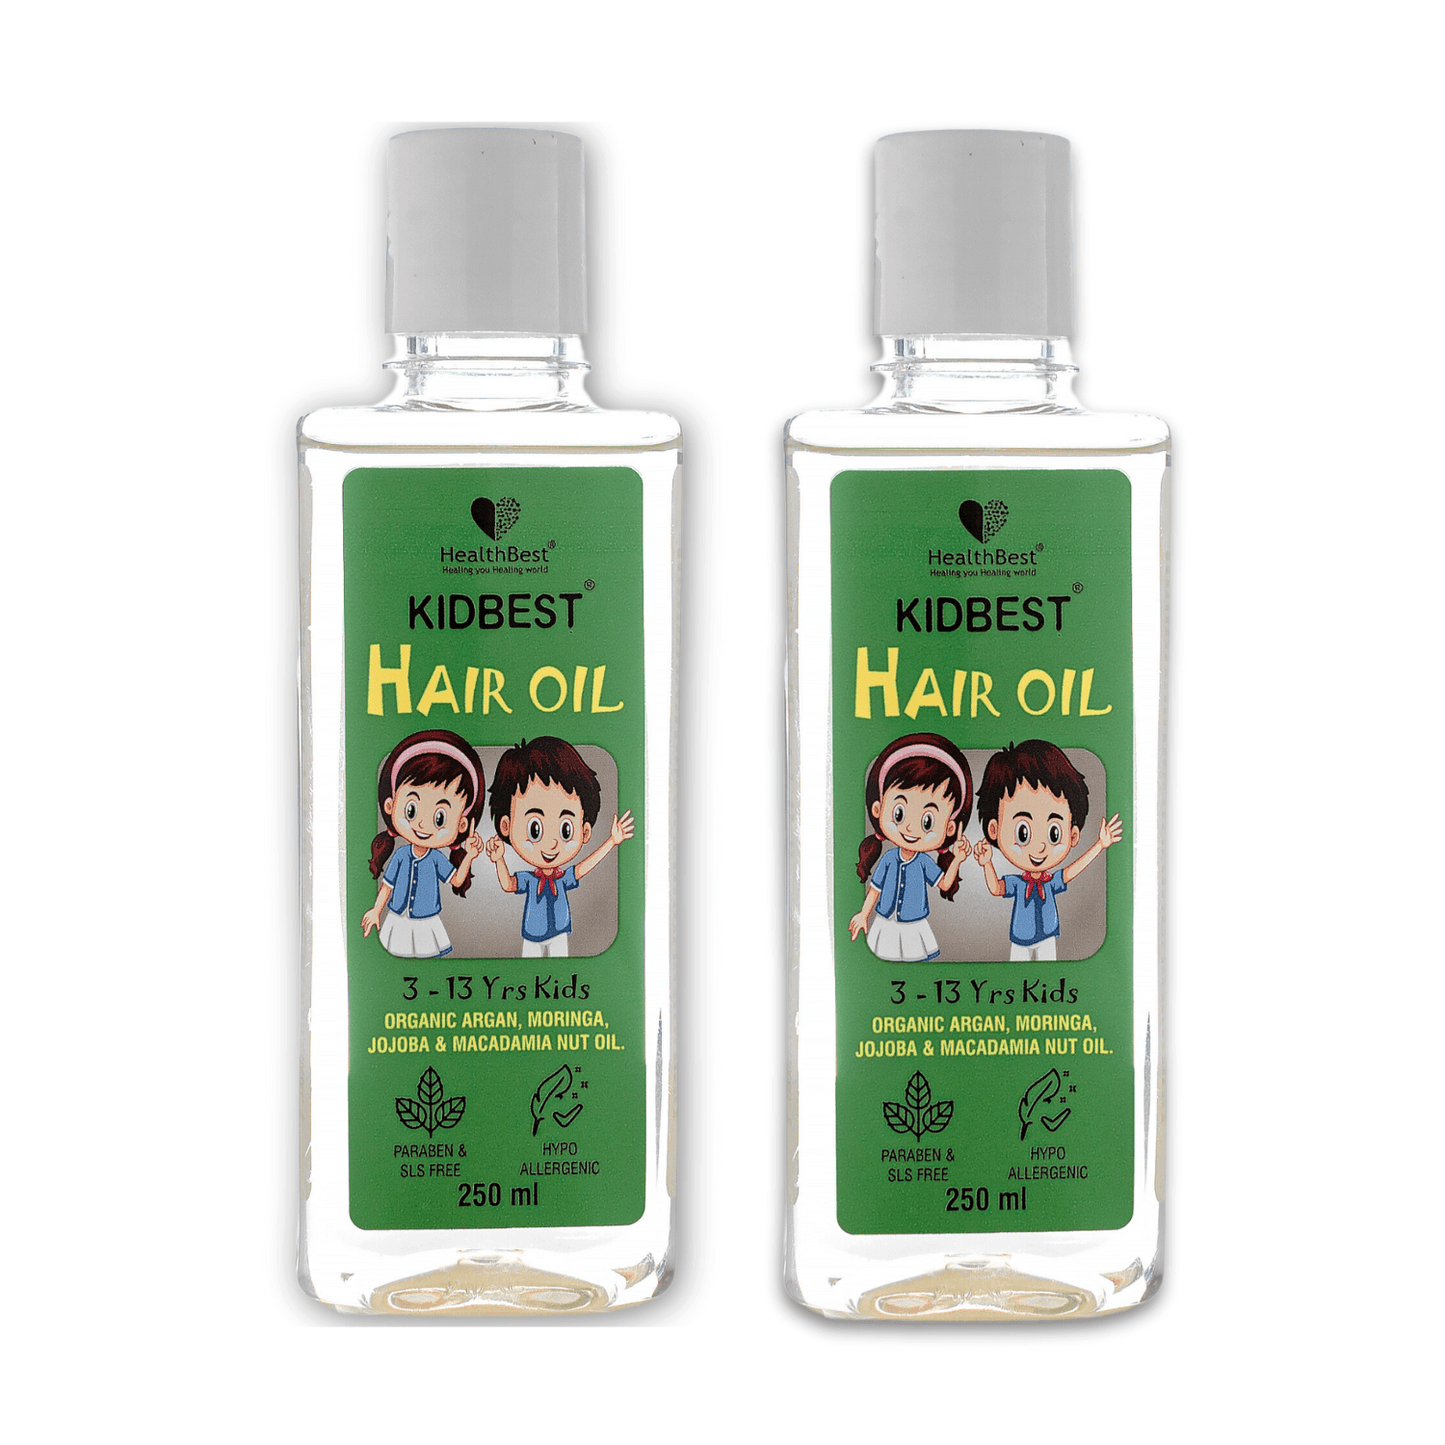 Kidbest Hair Oil for 3 to 13 Years Kids